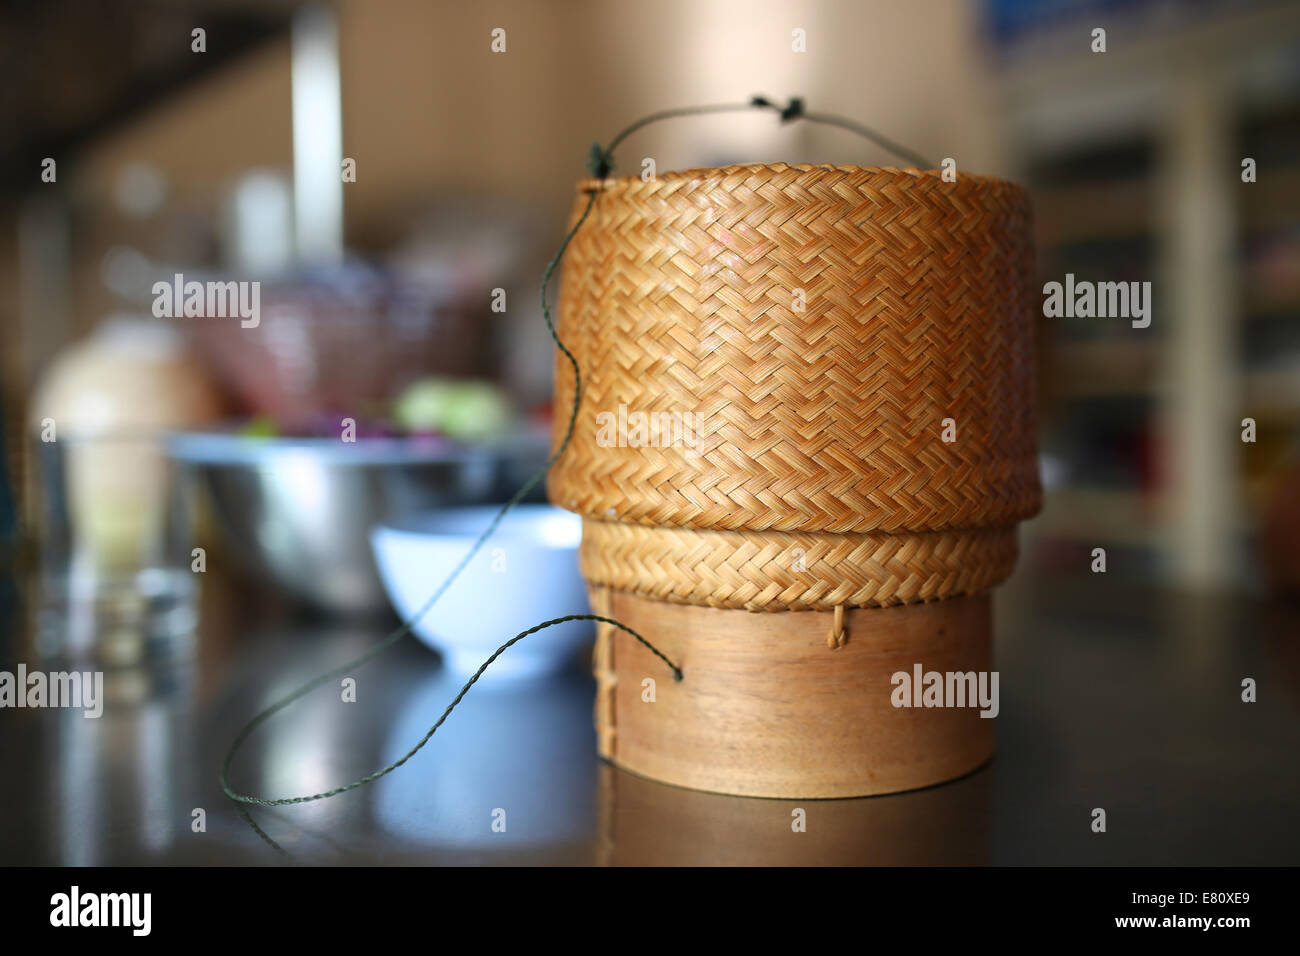 bamboo container for keeping glutinous rice Stock Photo